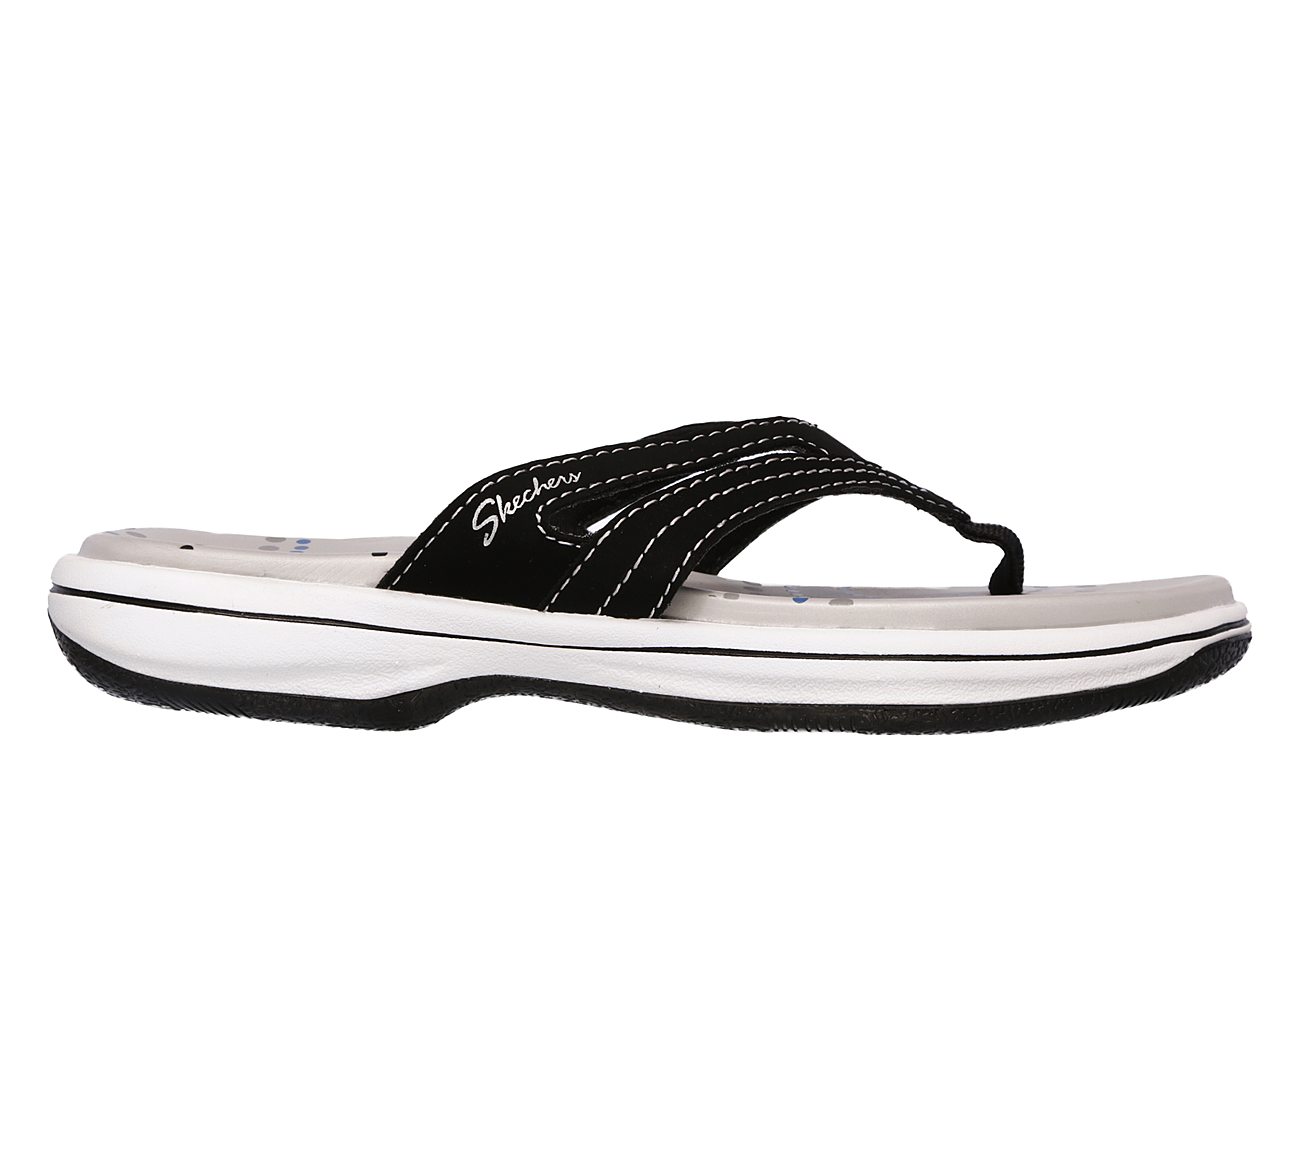 Buy SKECHERS Relaxed Fit: Bayshore 